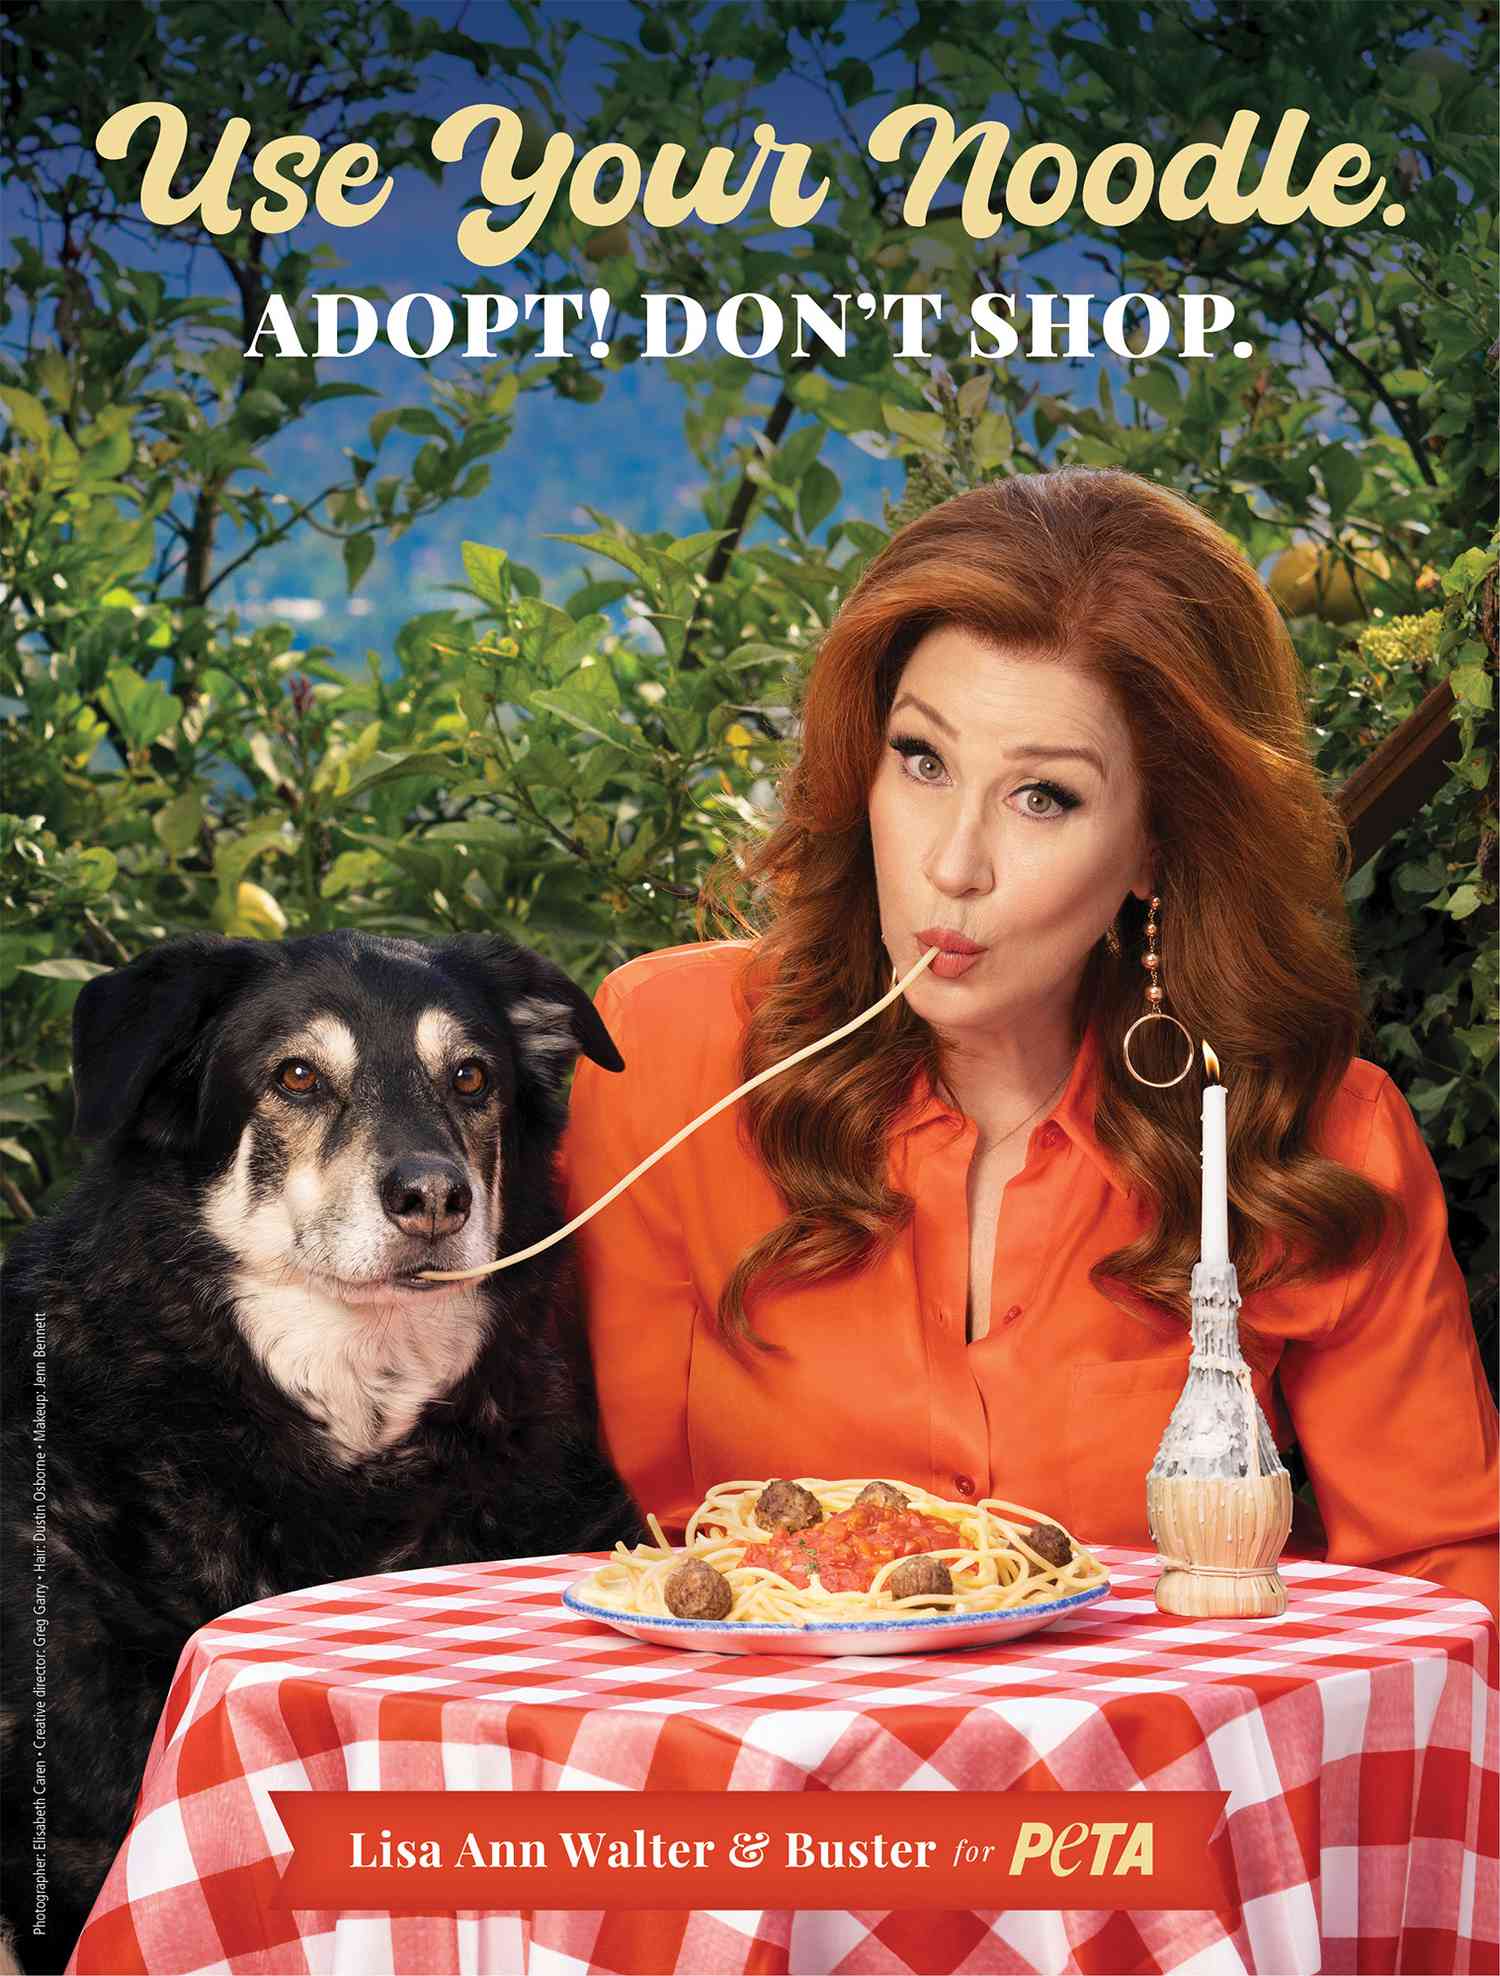 A Tail-Wagging Adventure with Lisa Ann Walter and Buster for PETA’s New Campaign